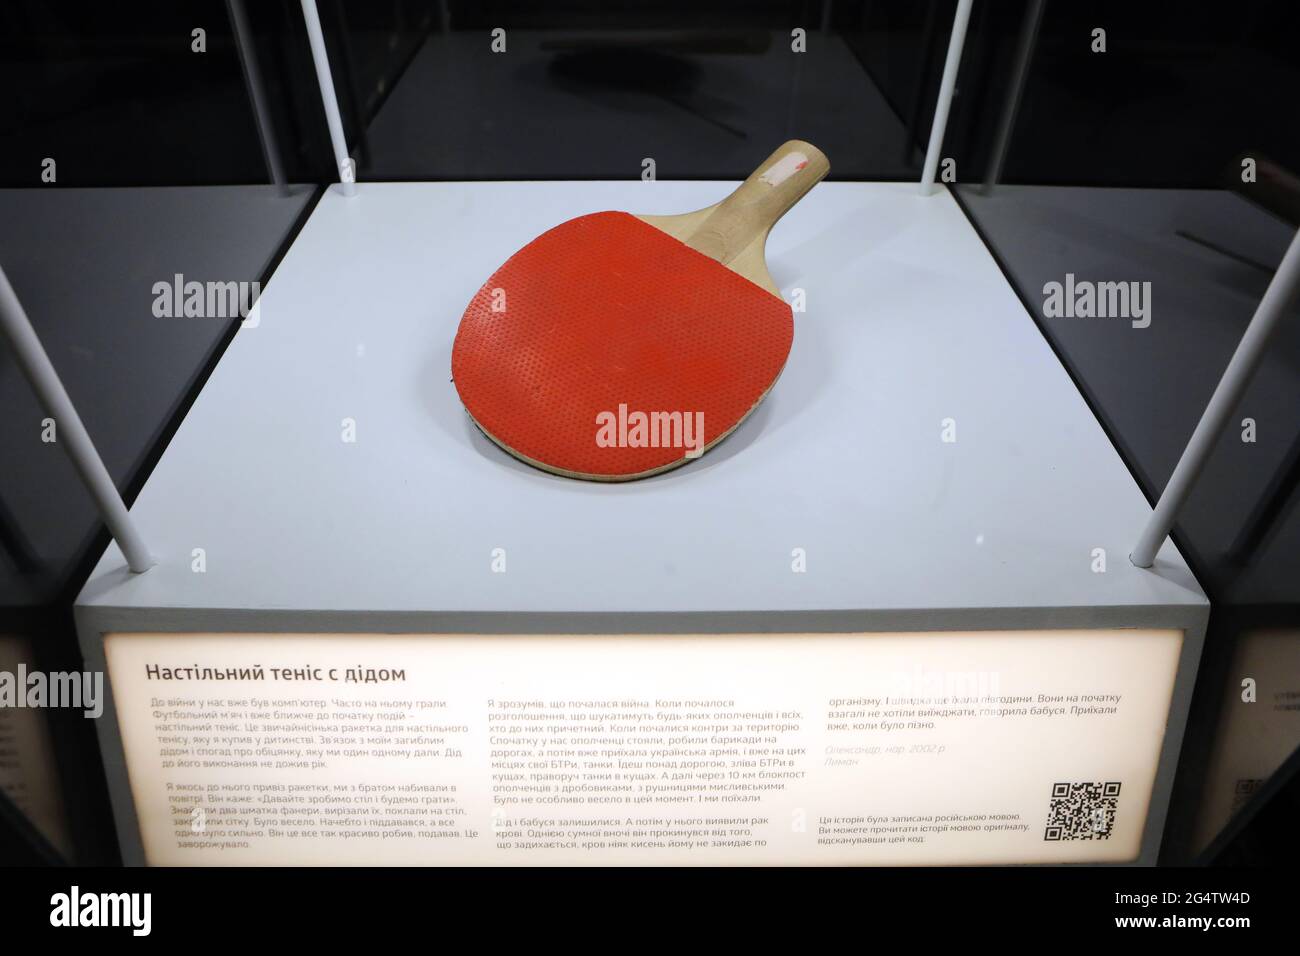 KYIV, UKRAINE - JUNE 23, 2021 - A table tennis paddle is on display at the first exhibition of the War Childhood Museum in Ukraine hosted by the Kyiv Stock Photo